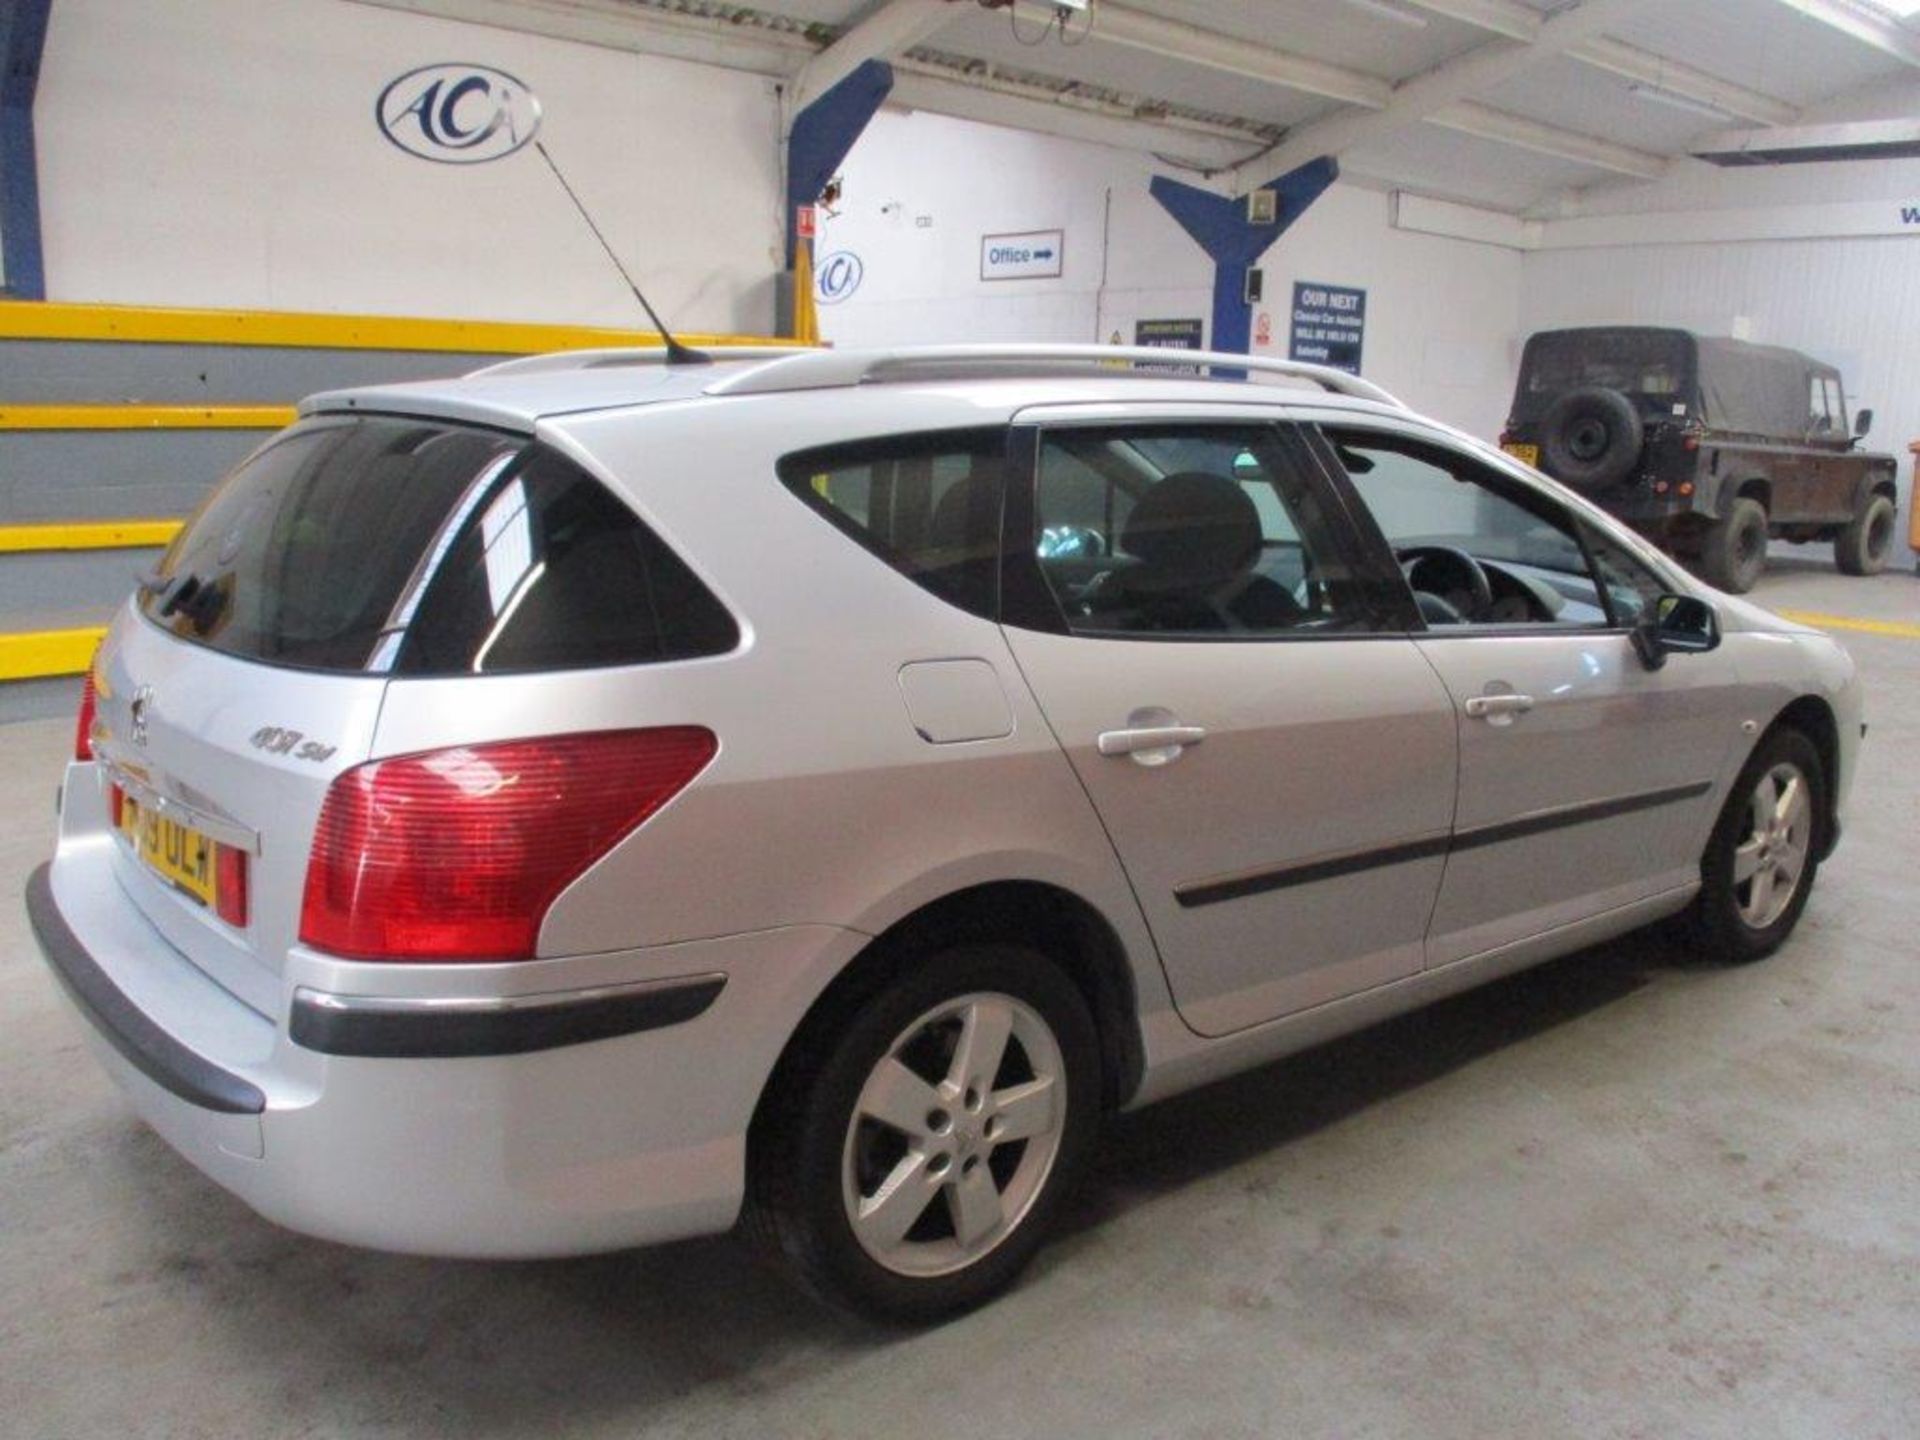 09 09 Peugeot 407 SW - Image 2 of 22